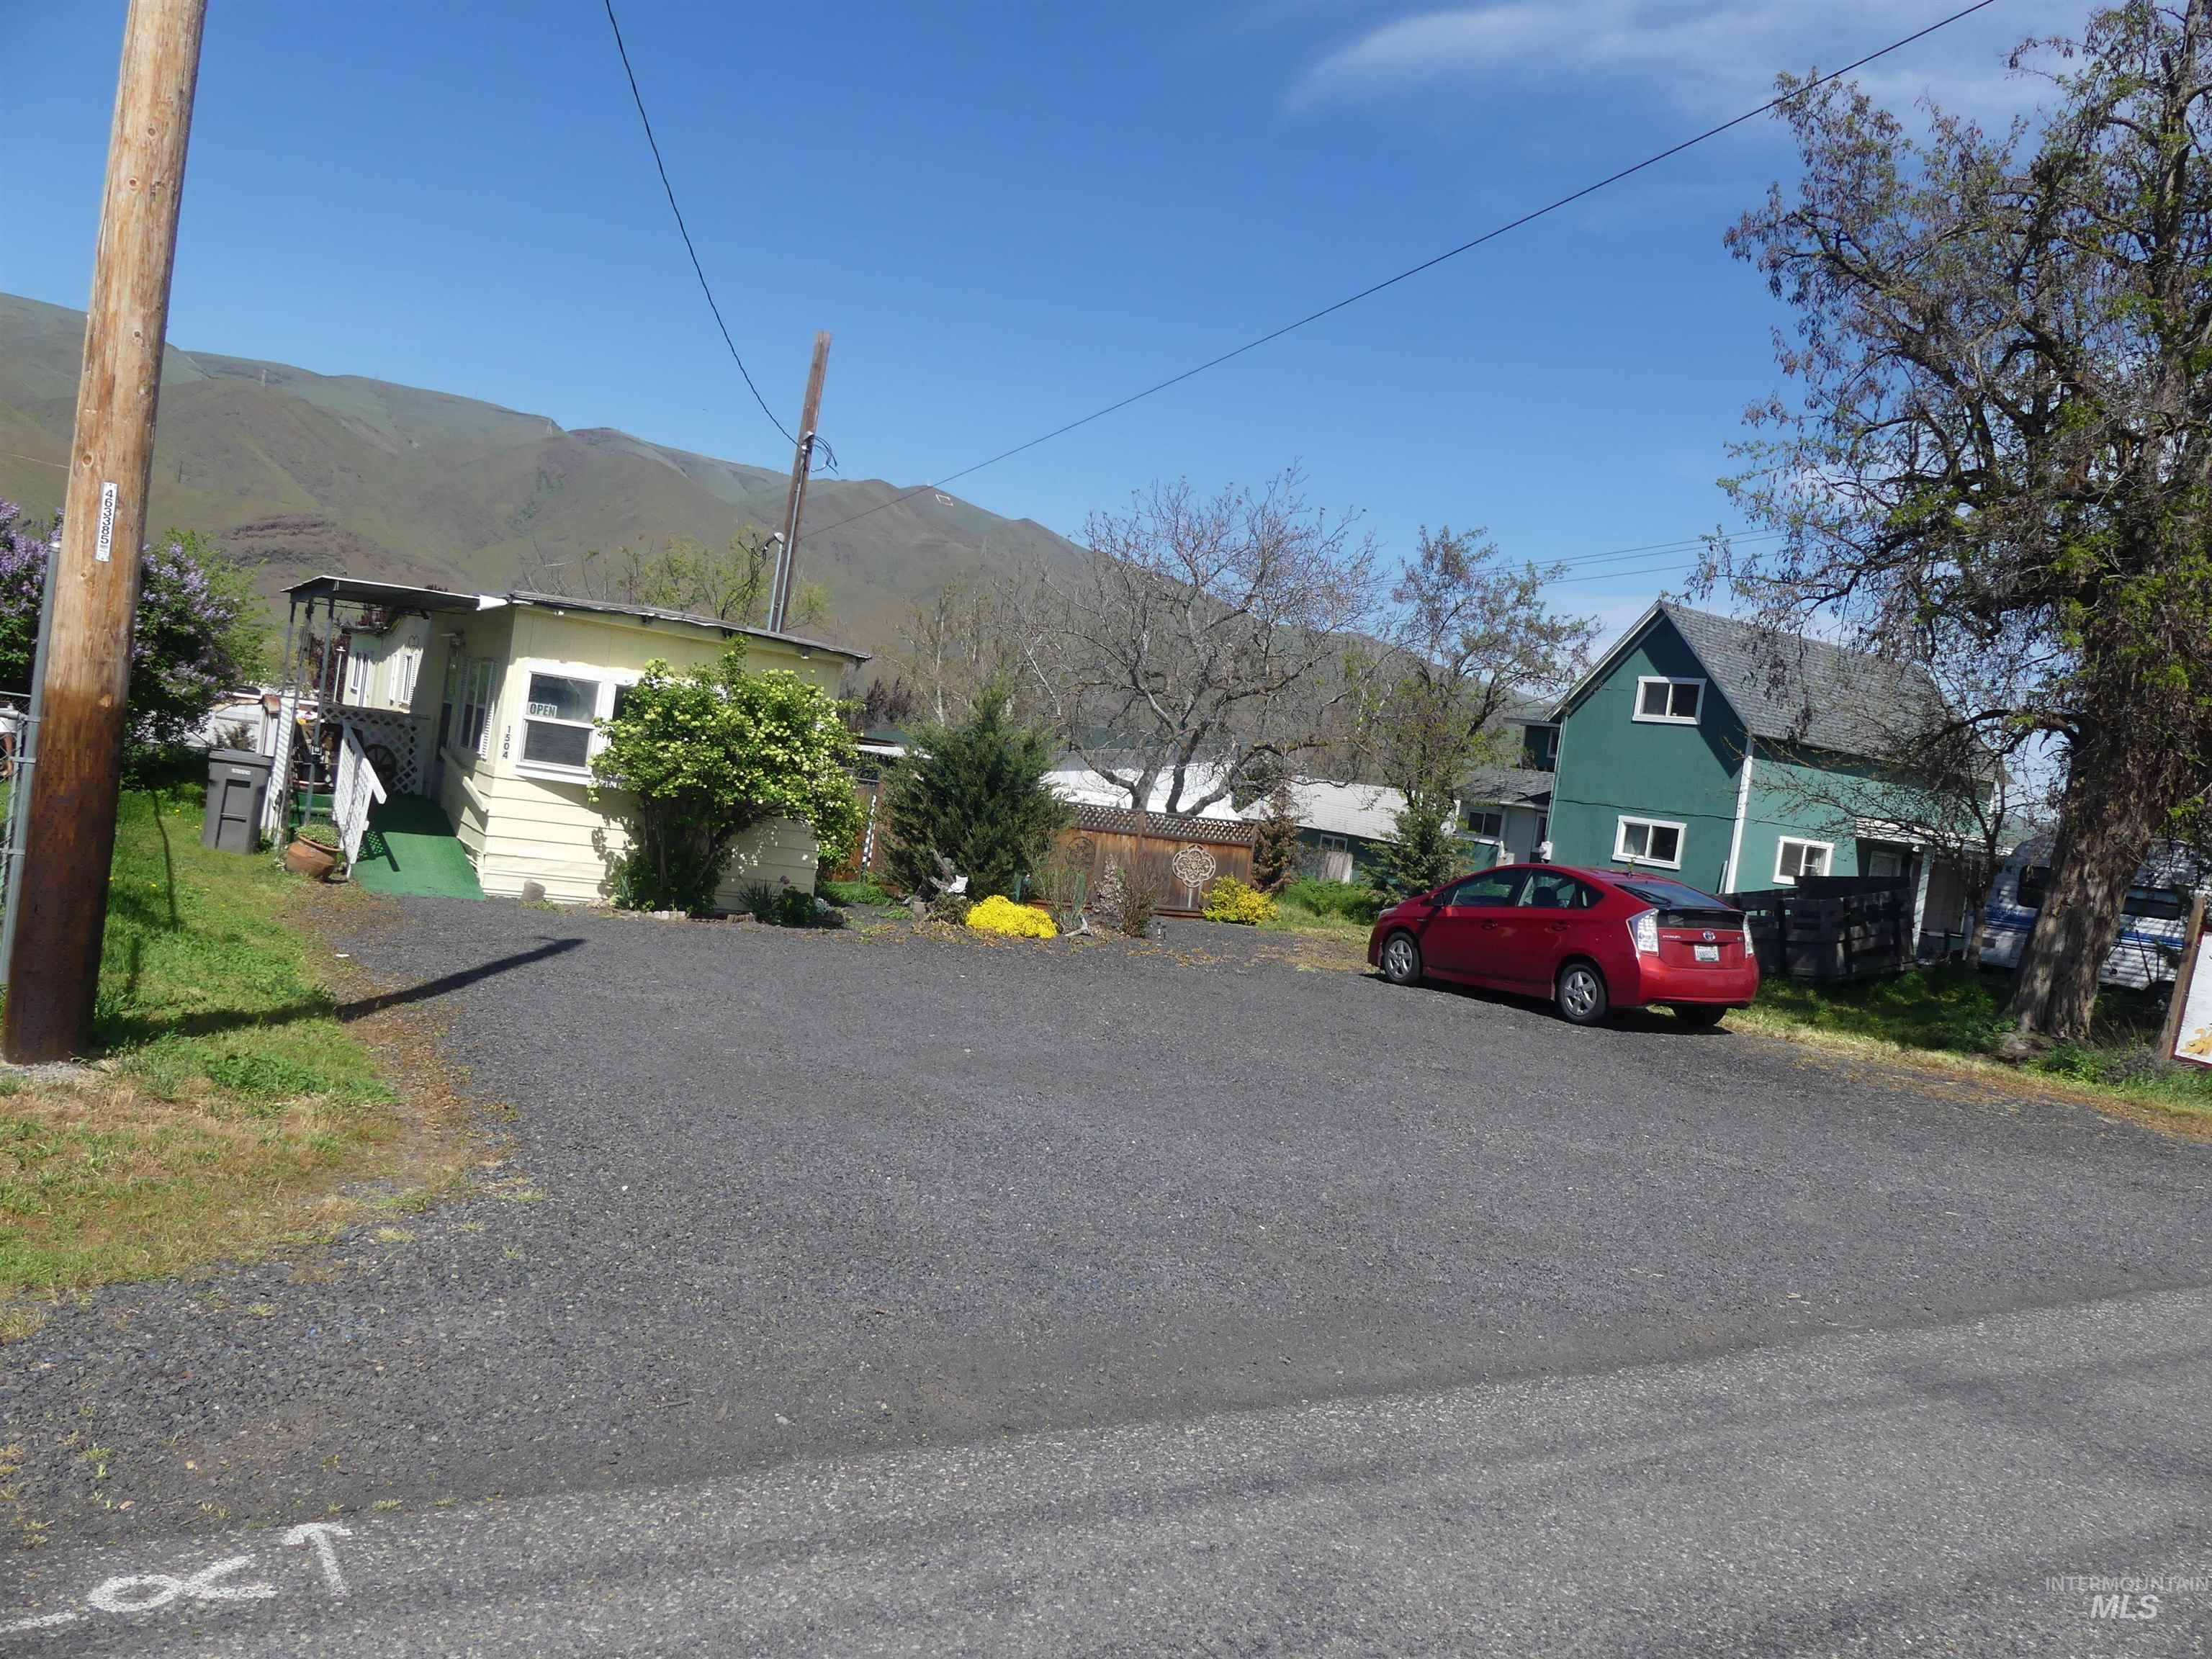 1504 Maple St, Clarkston, Washington 99403, Business/Commercial For Sale, Price $100,000,MLS 98906848